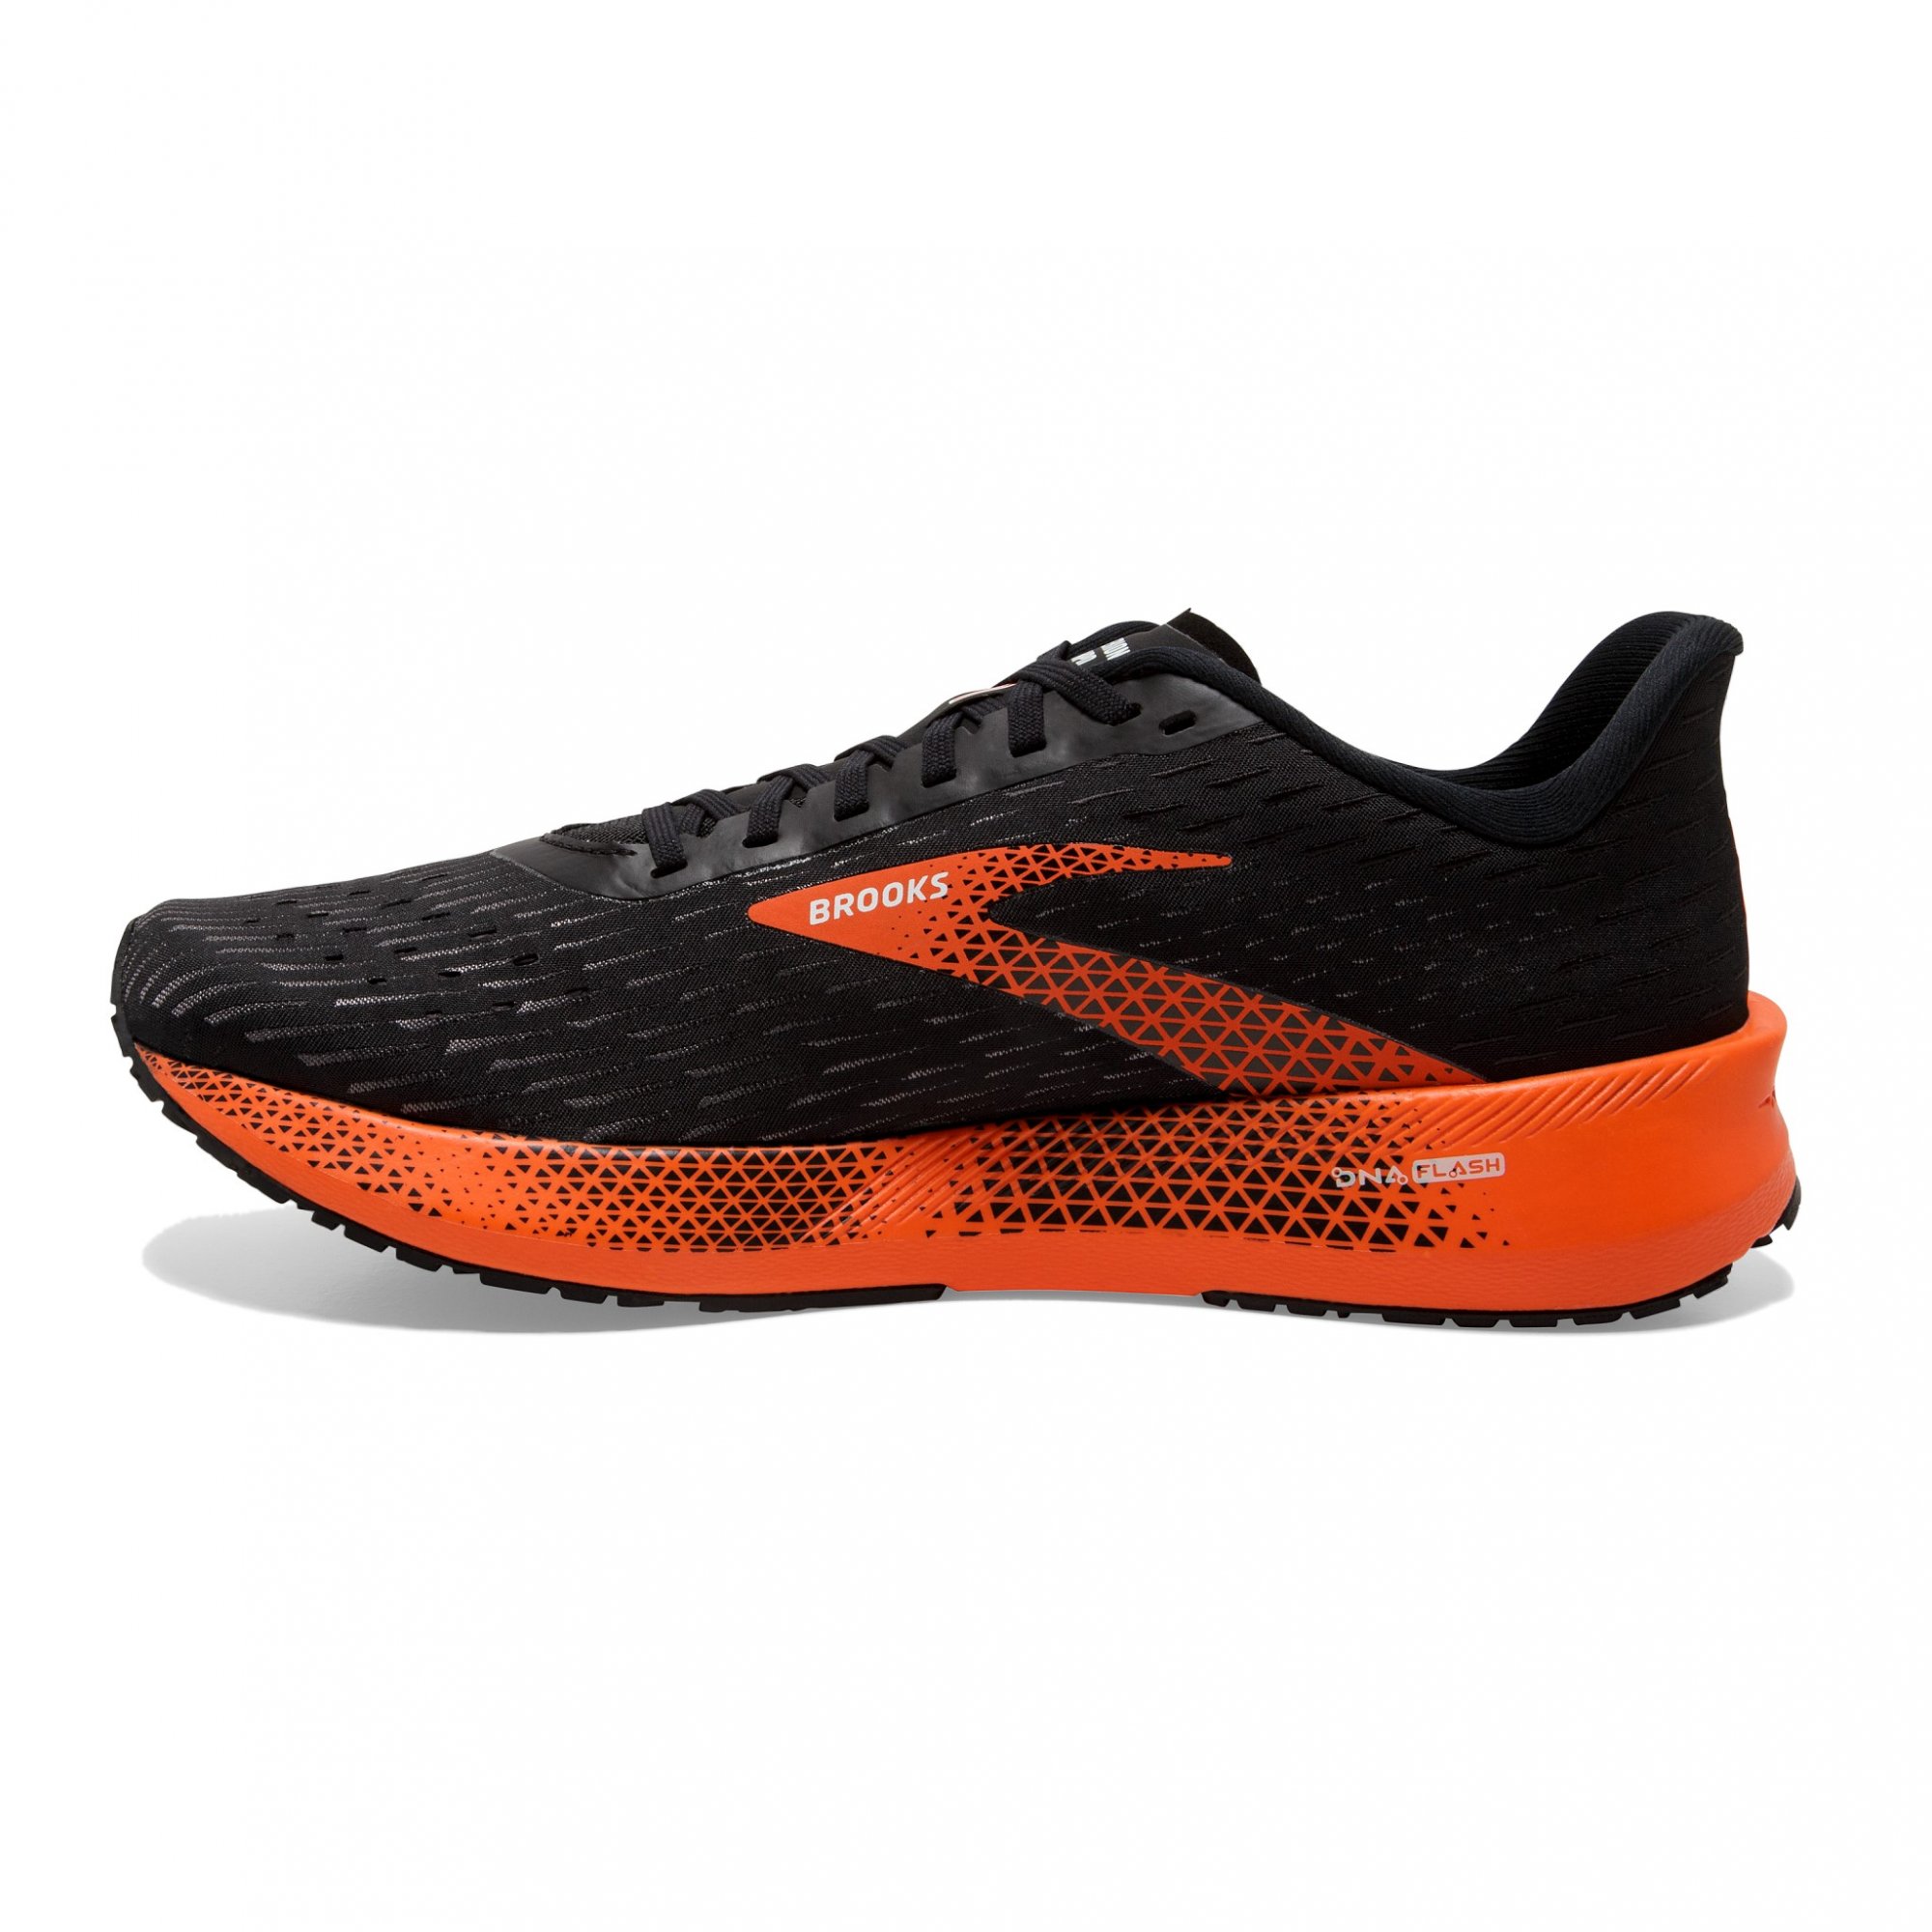 BROOKS Hyperion Tempo Black/Flame/Grey